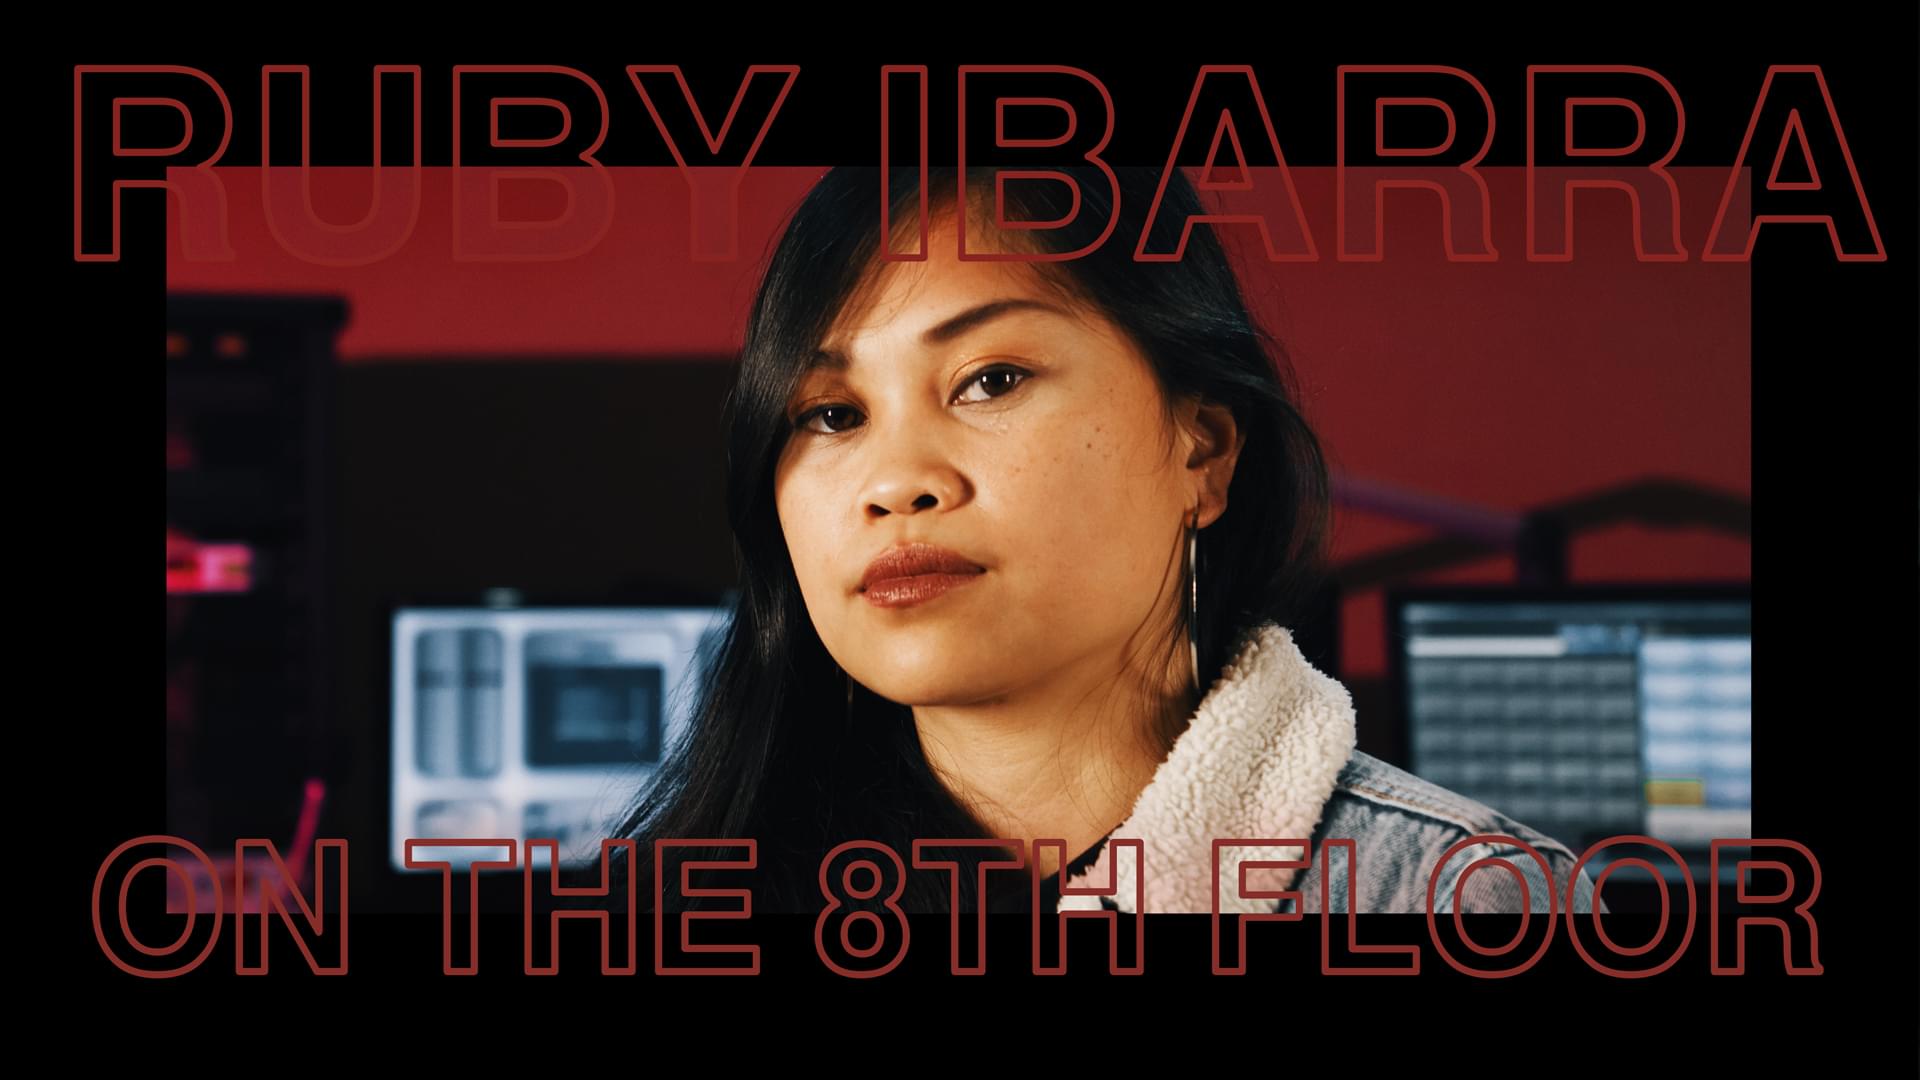 Ruby Ibarra Performs “Us” LIVE #OnThe8thFloor [WATCH]